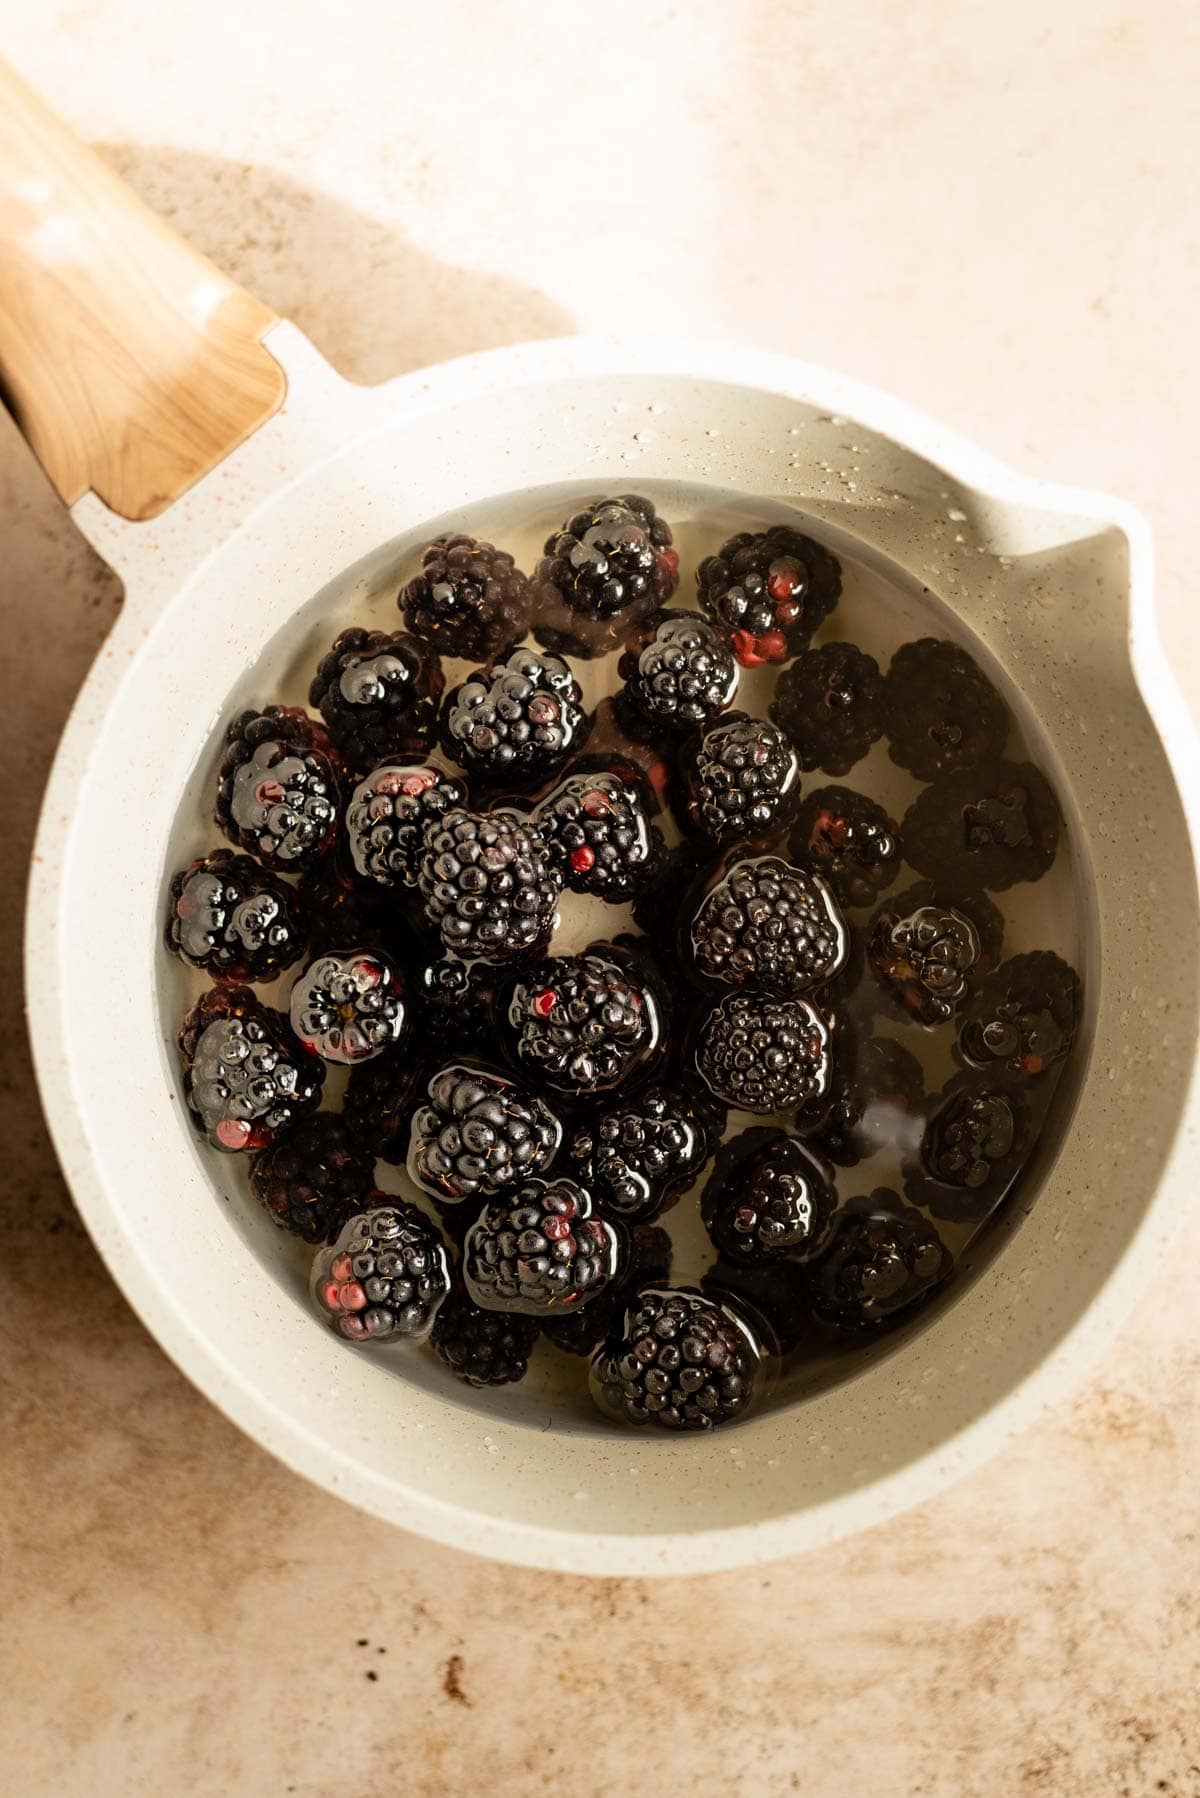 The blackberries, sugar, and water sitting in a small pot.